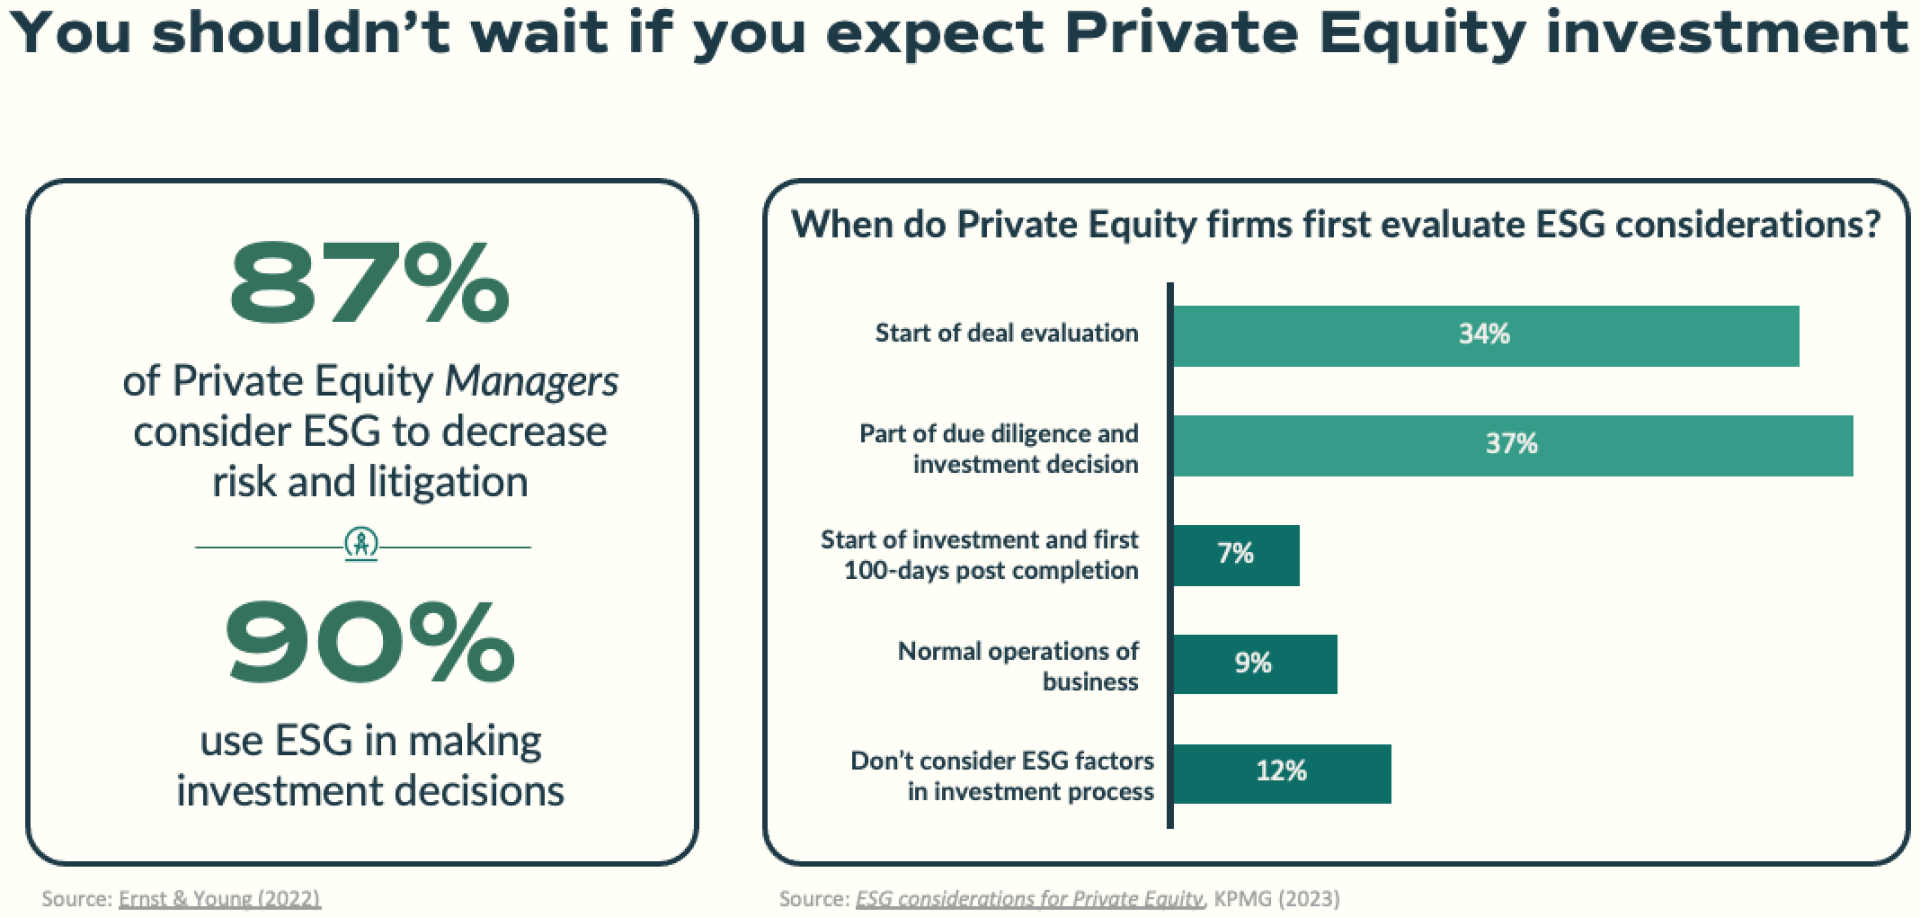 Private Equity firms prioritize sustainability